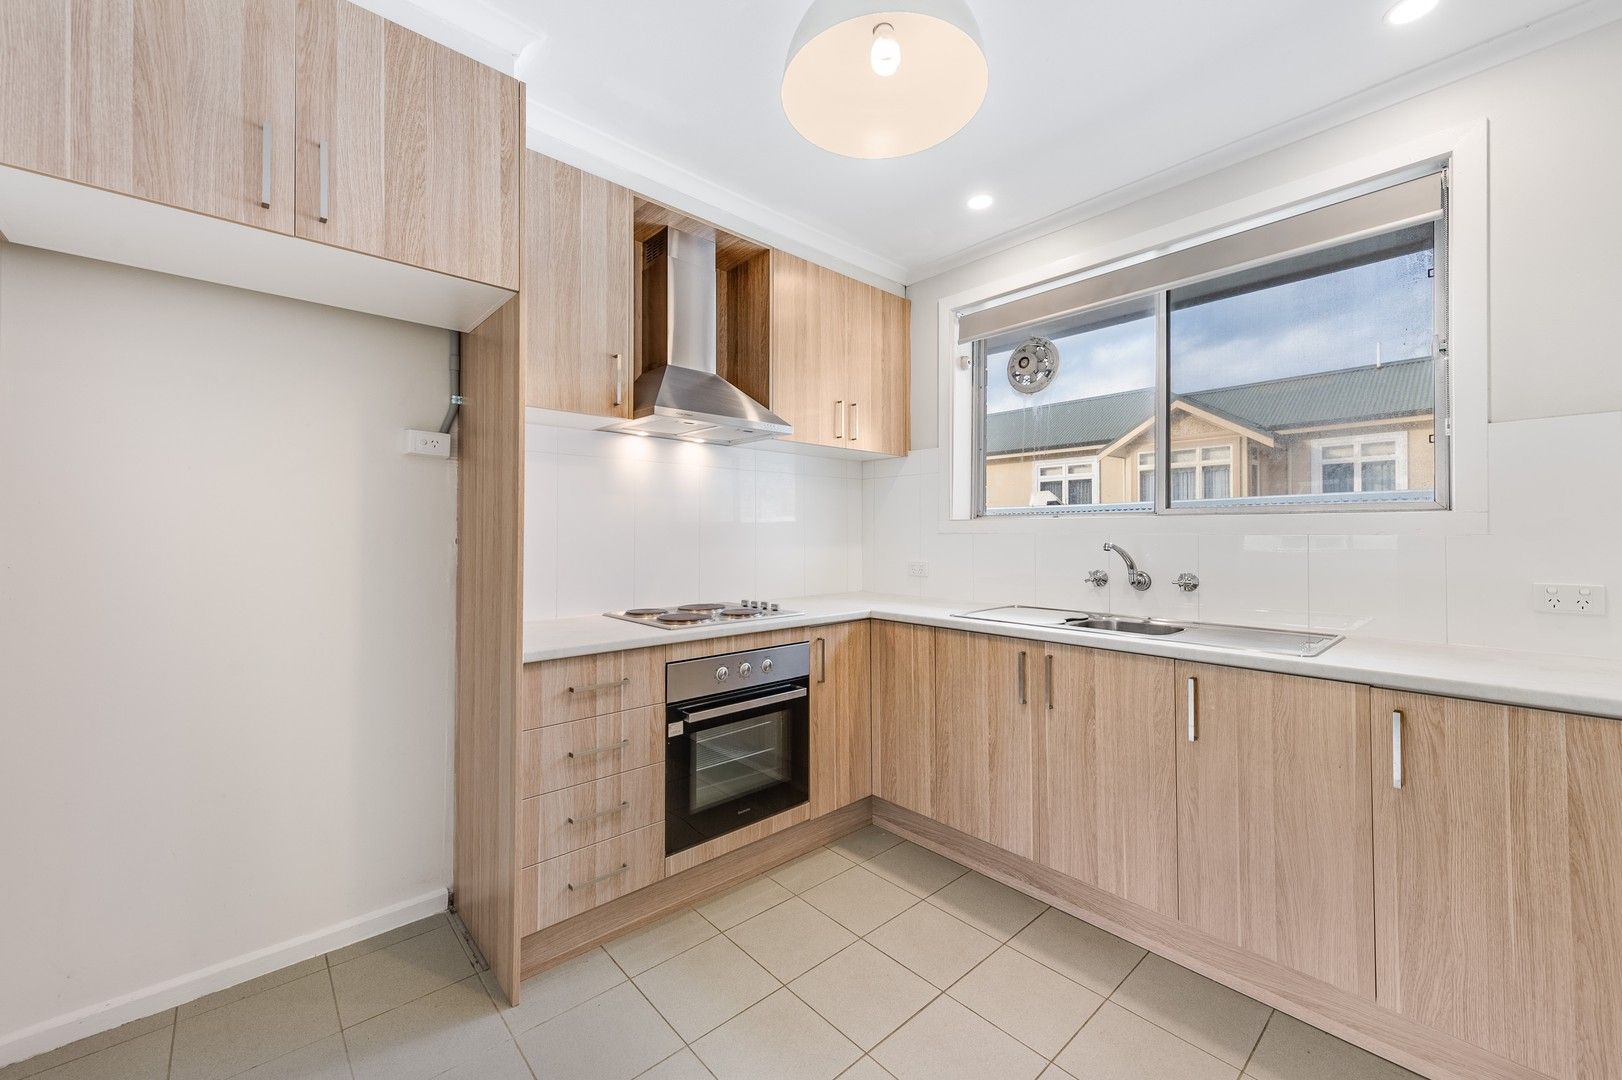 2 bedrooms Apartment / Unit / Flat in 8/88 Victoria Street WILLIAMSTOWN VIC, 3016